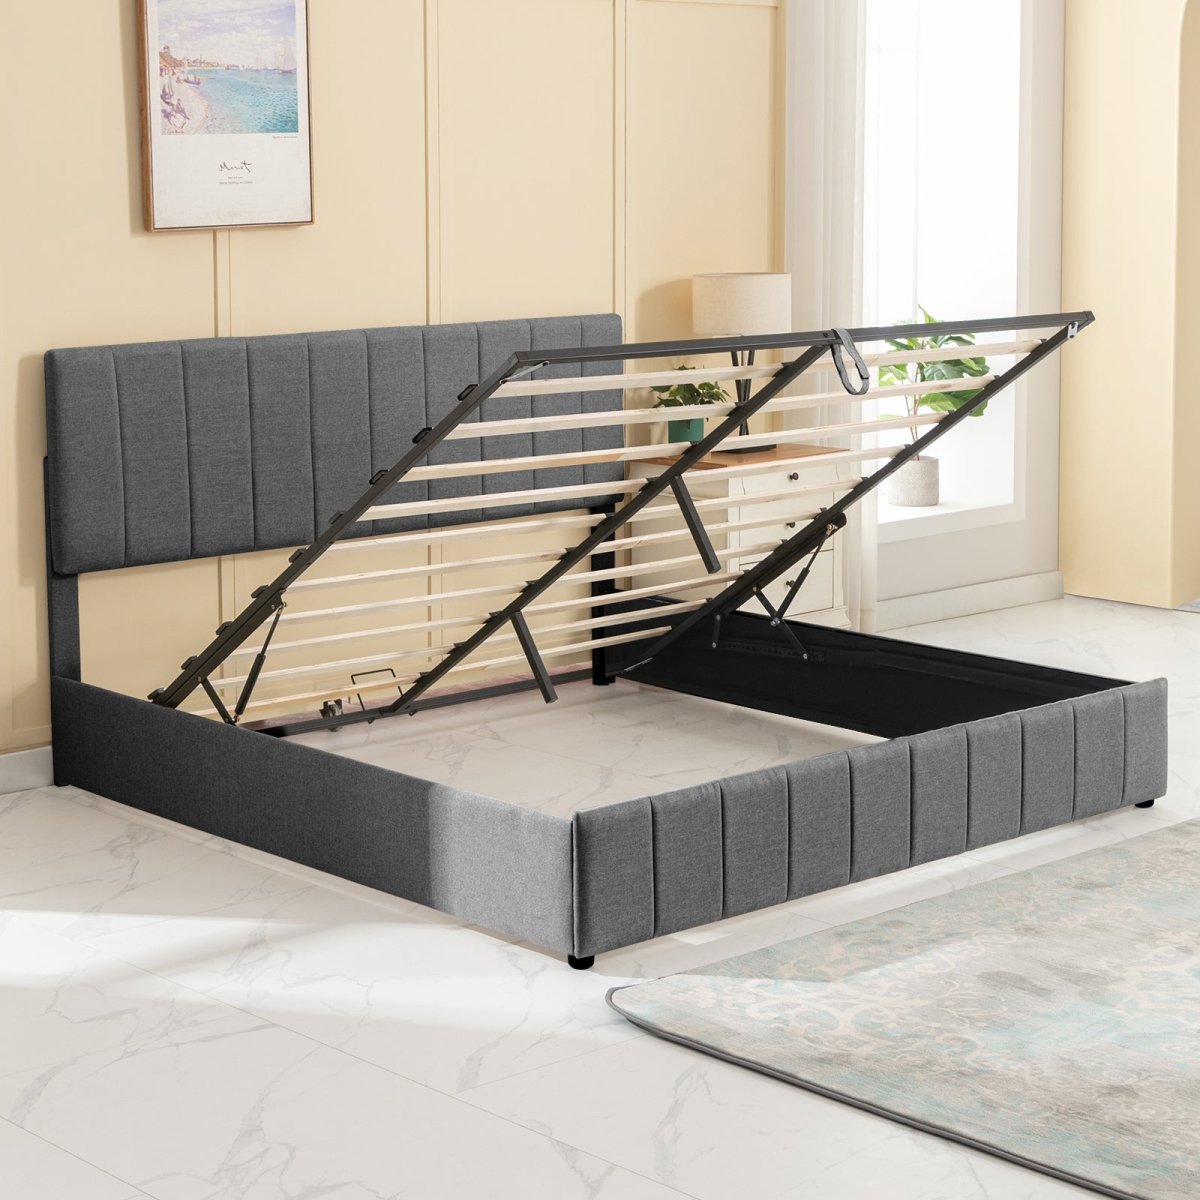 Bed Frame | Linen Upholstered Bed with Vertical Tufted Headboard and Under-bed Storage Spaces - Mjkonebed frame